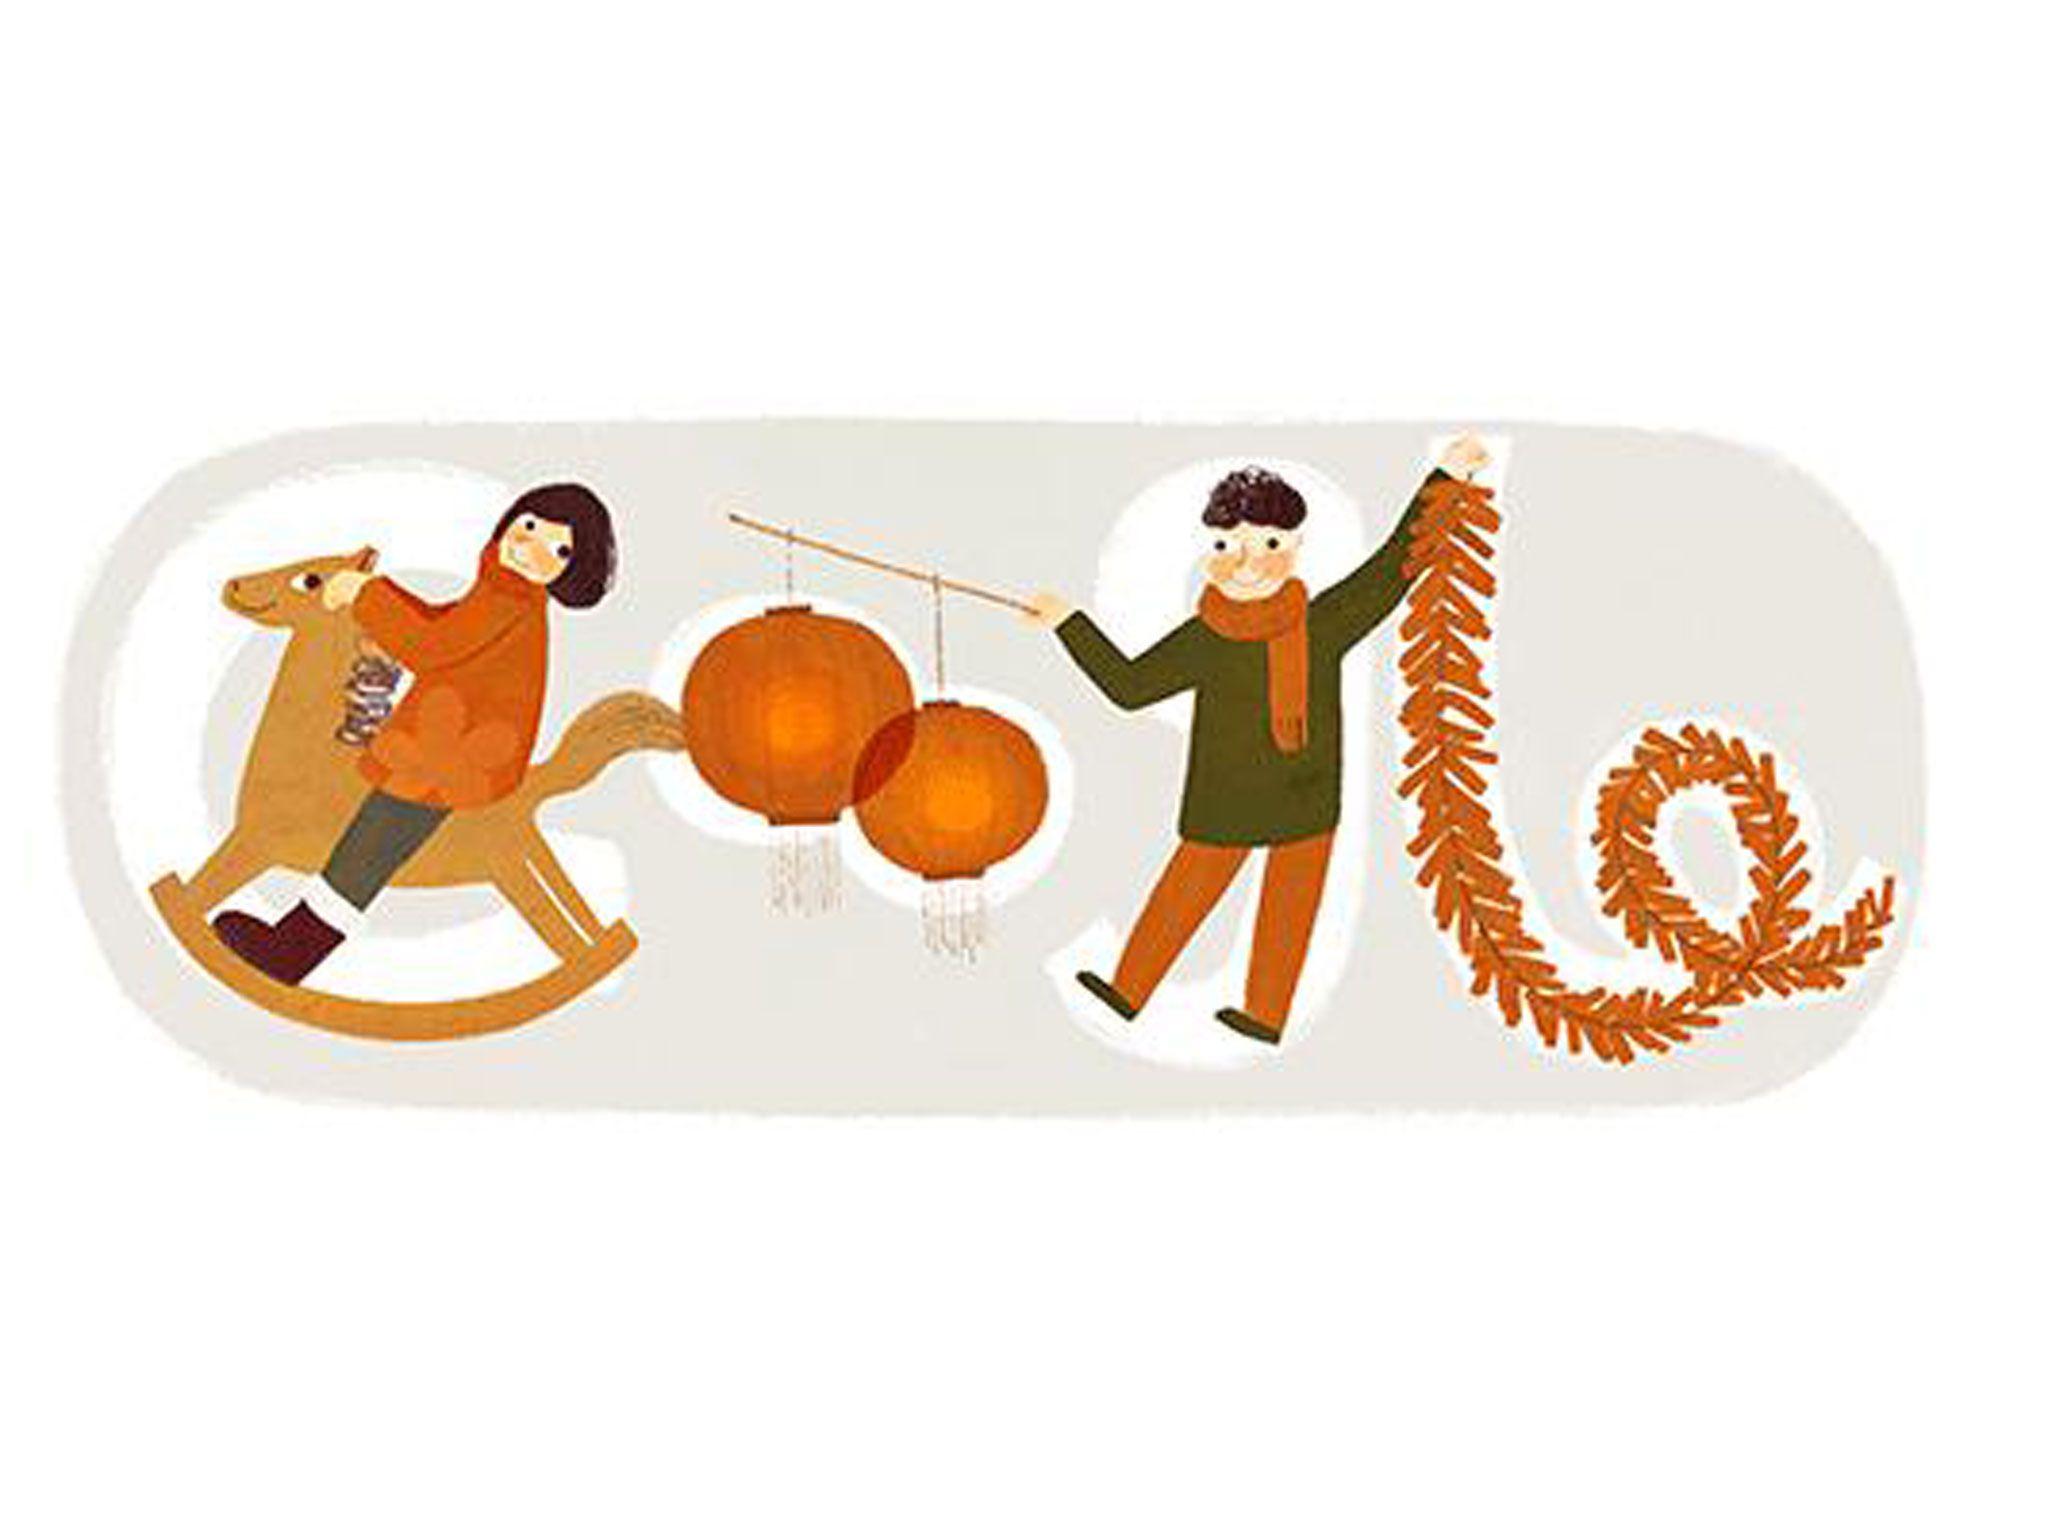 Spring Google Logo - Chinese New Year 2014: Year of the Horse celebrated with Google